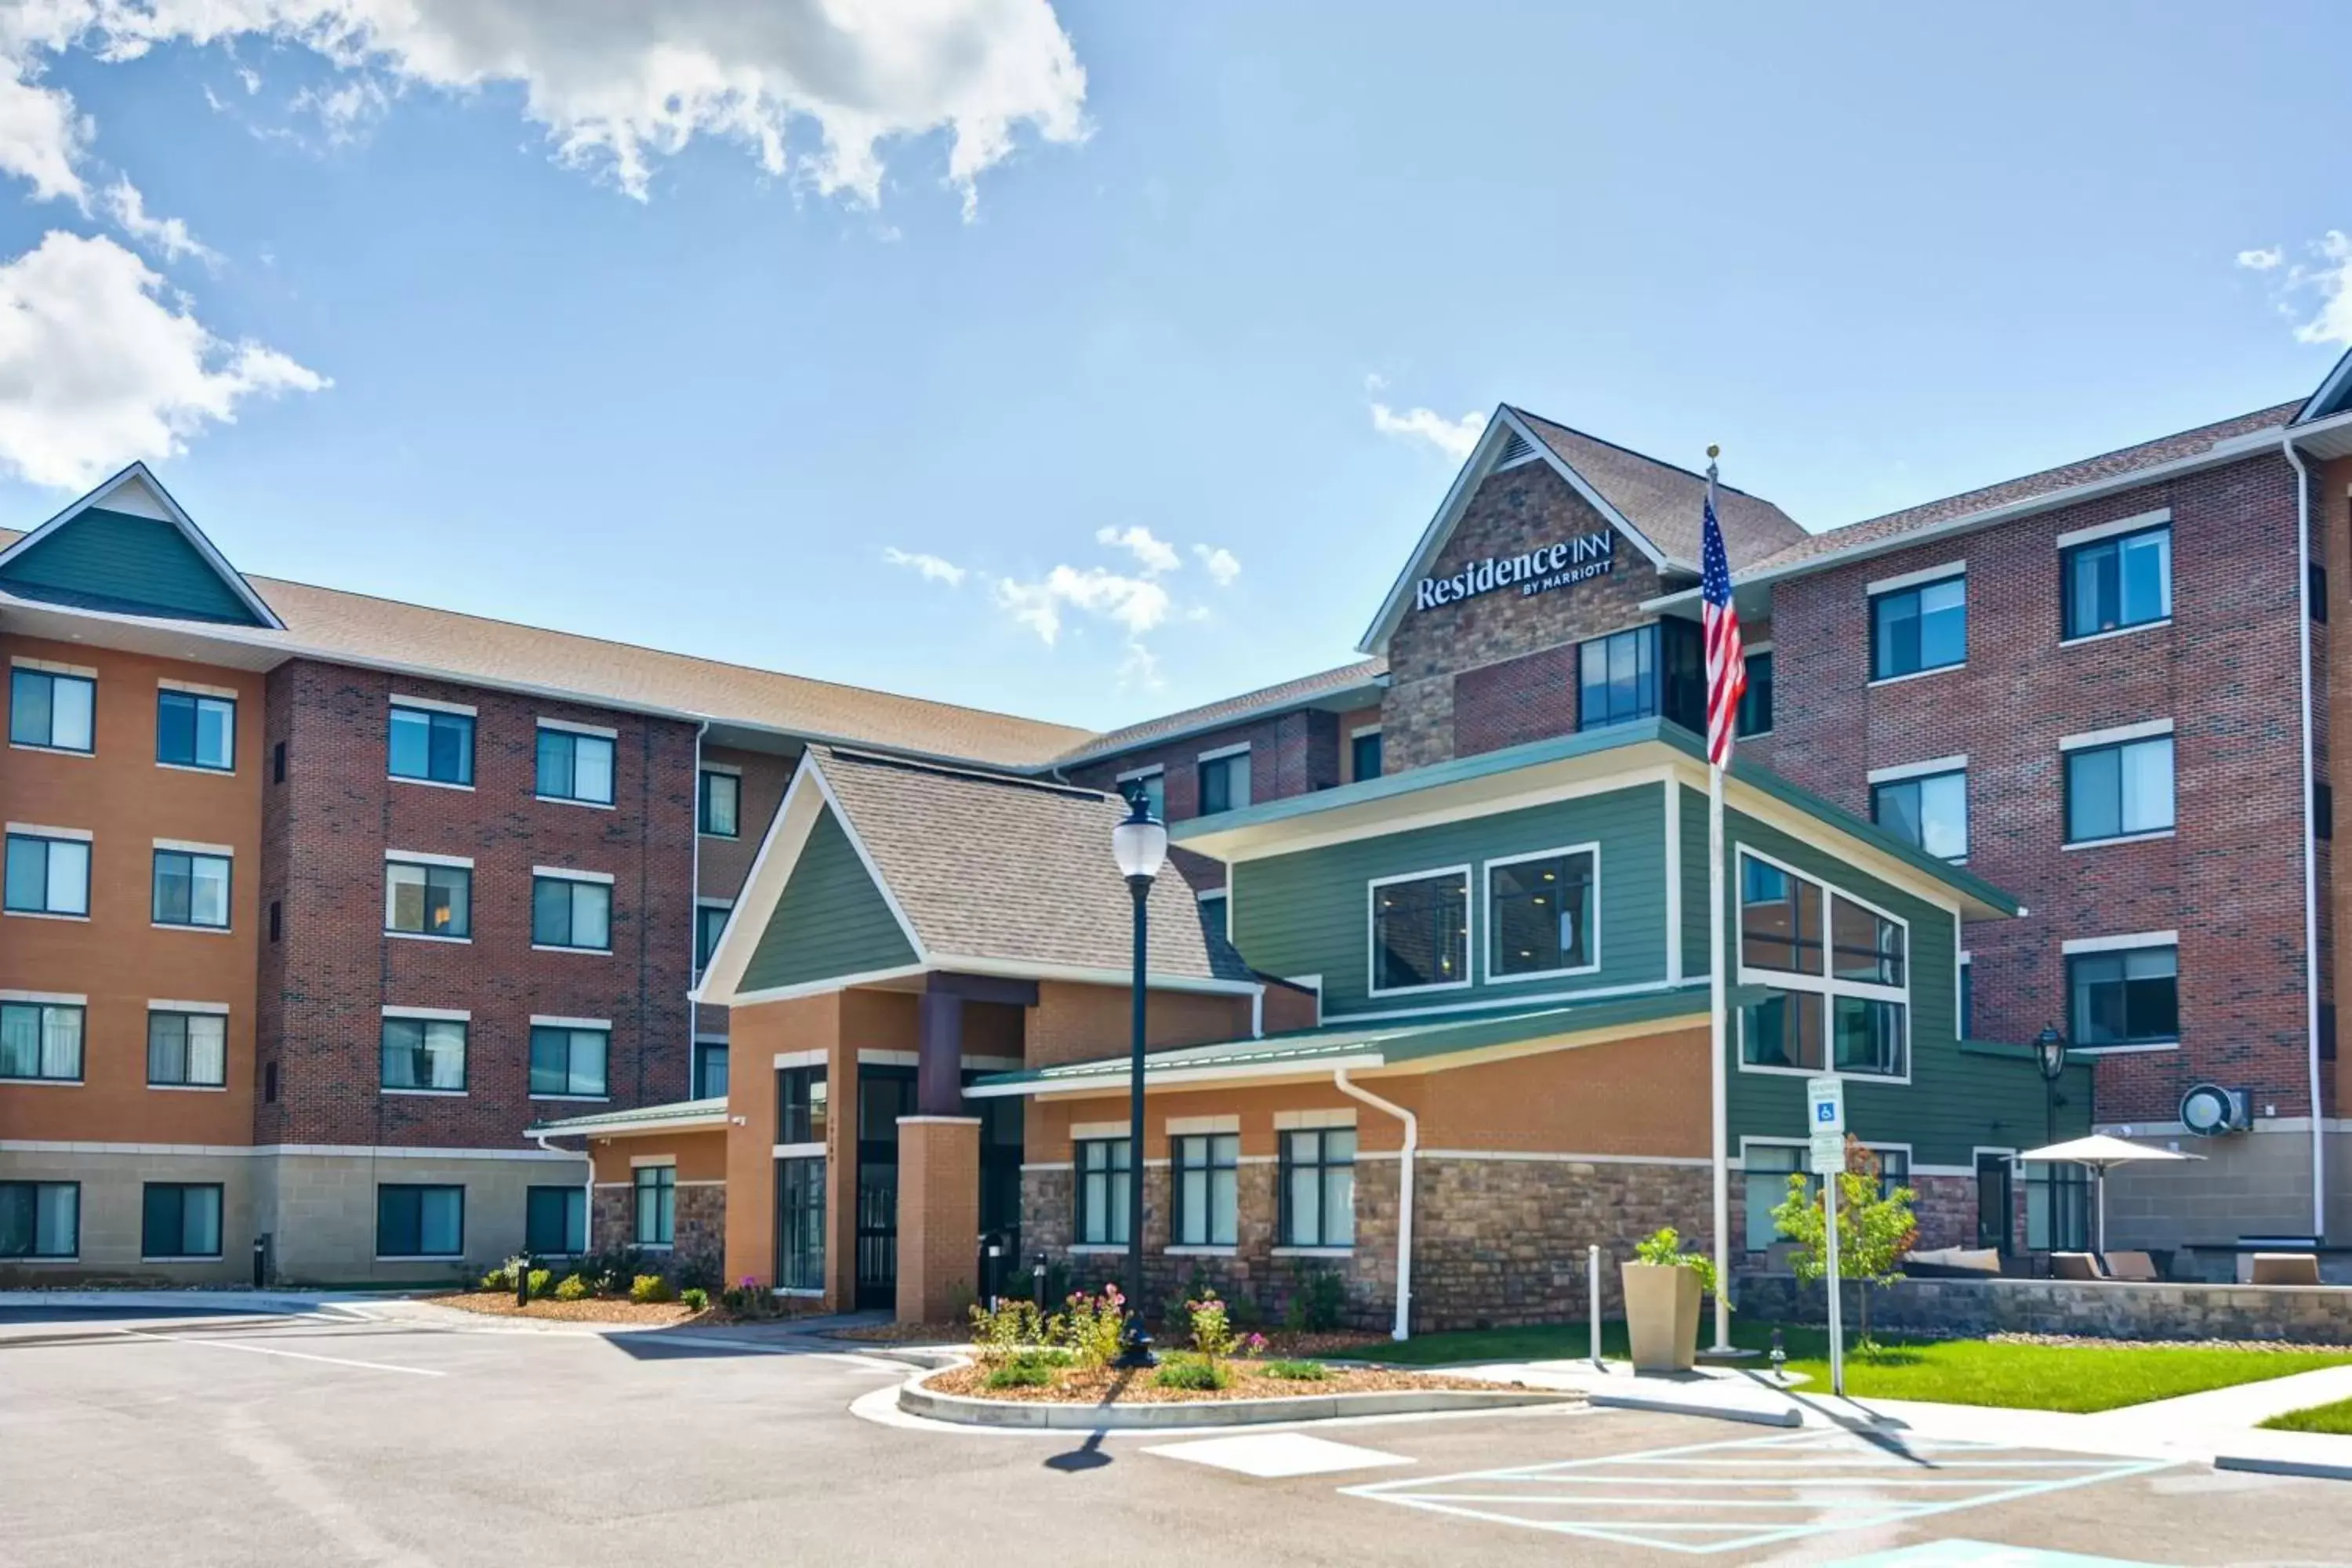 Property Building in Residence Inn by Marriott Cleveland Airport/Middleburg Heights